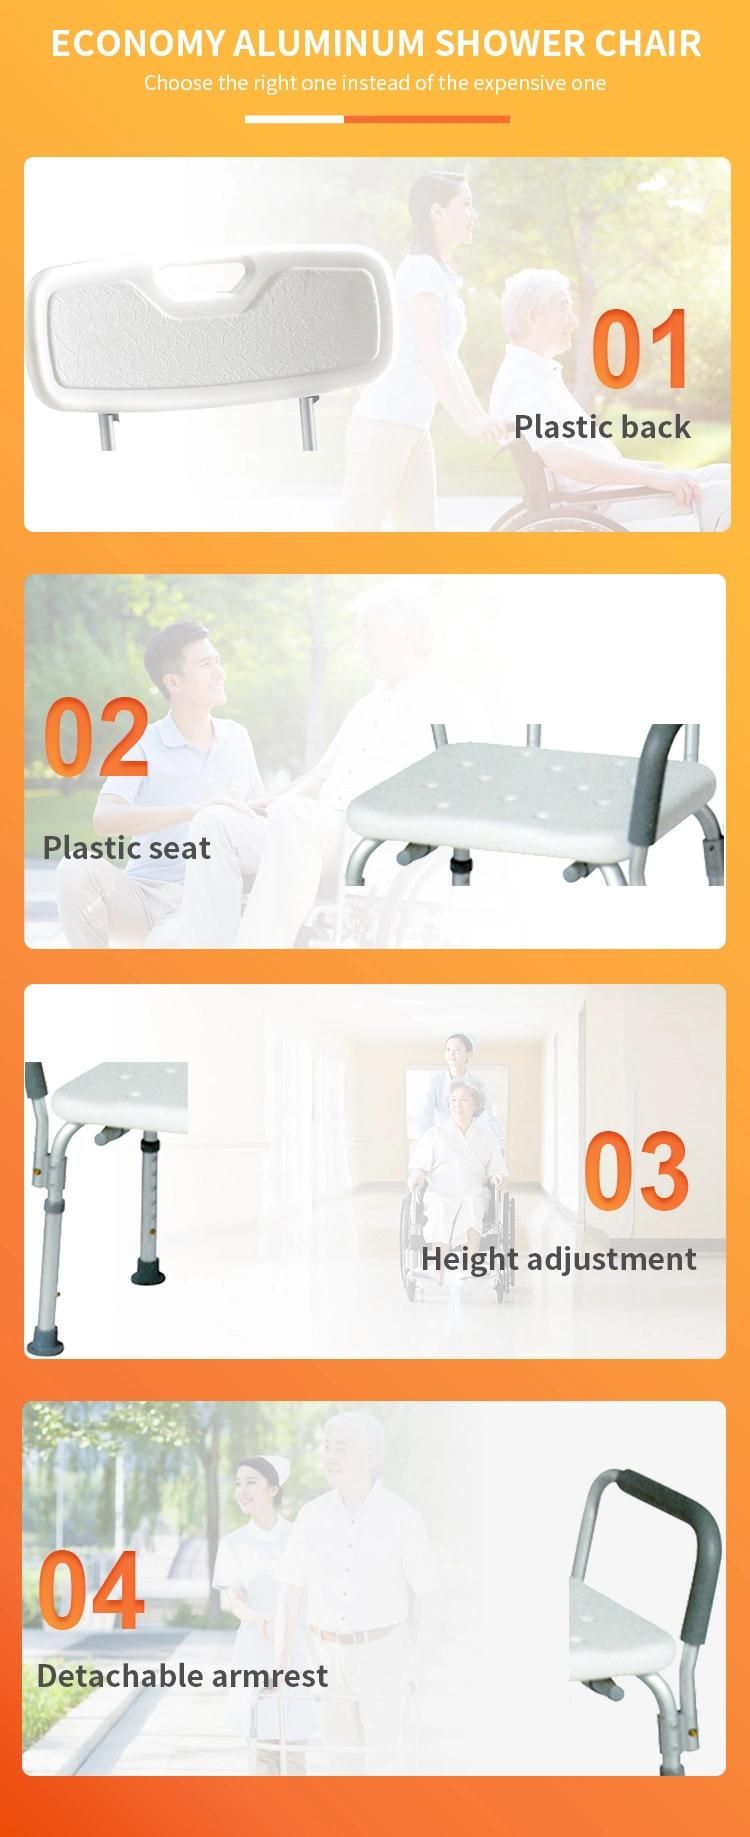 Hot Selling Adjustable Height Can Detachable Armrest Shower Commode Chair with Backrest